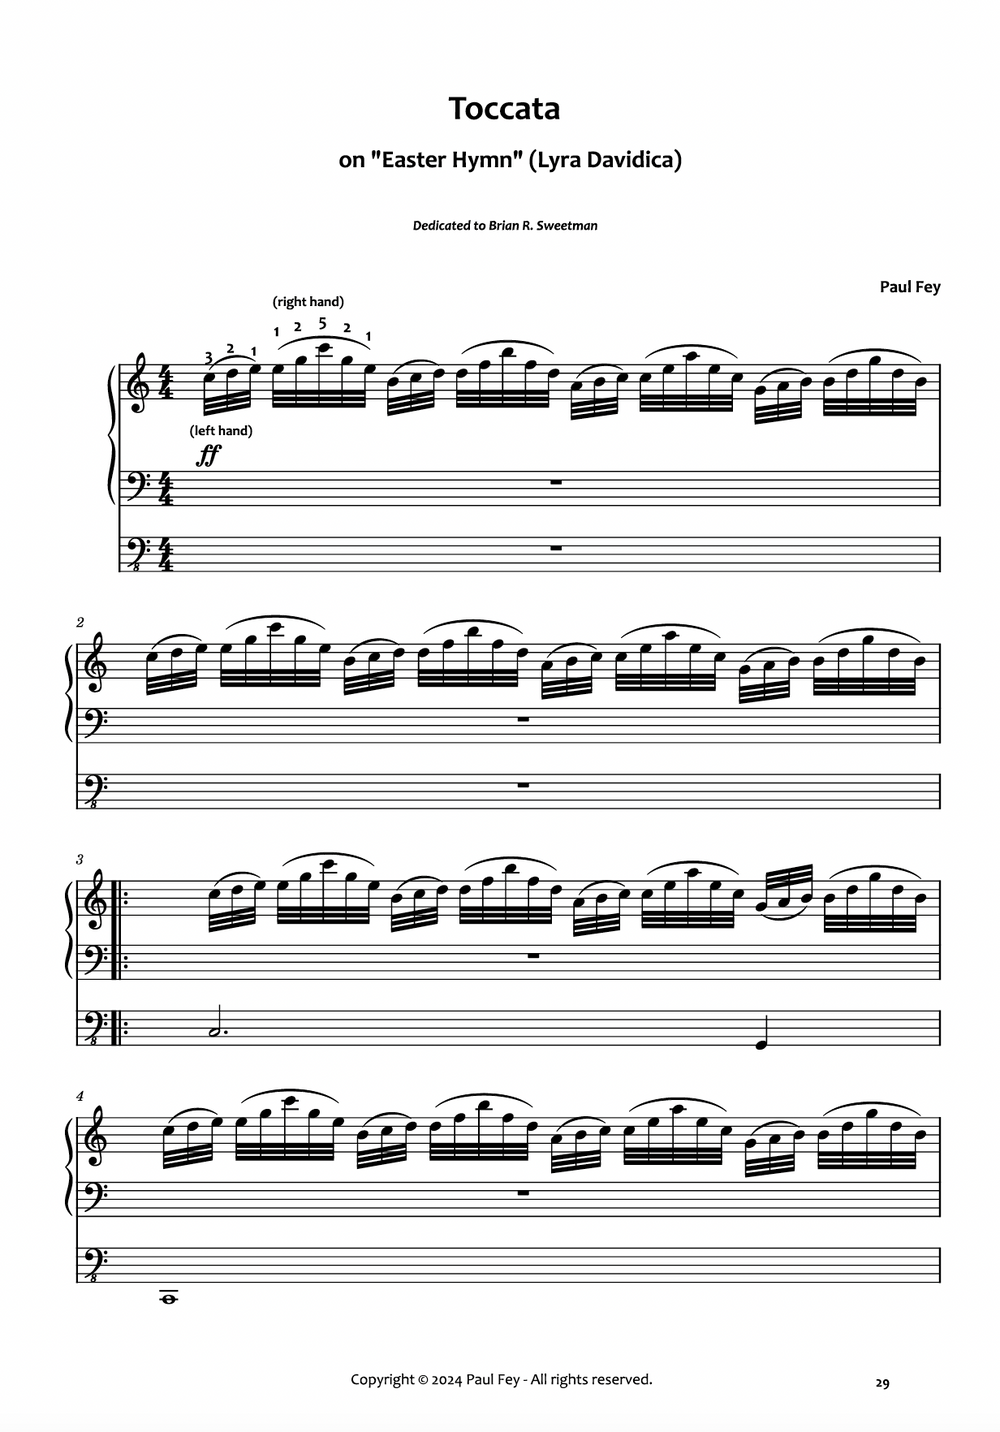 Toccata on "Easter Hymn" (Sheet Music) - Music for Organ PDF Download